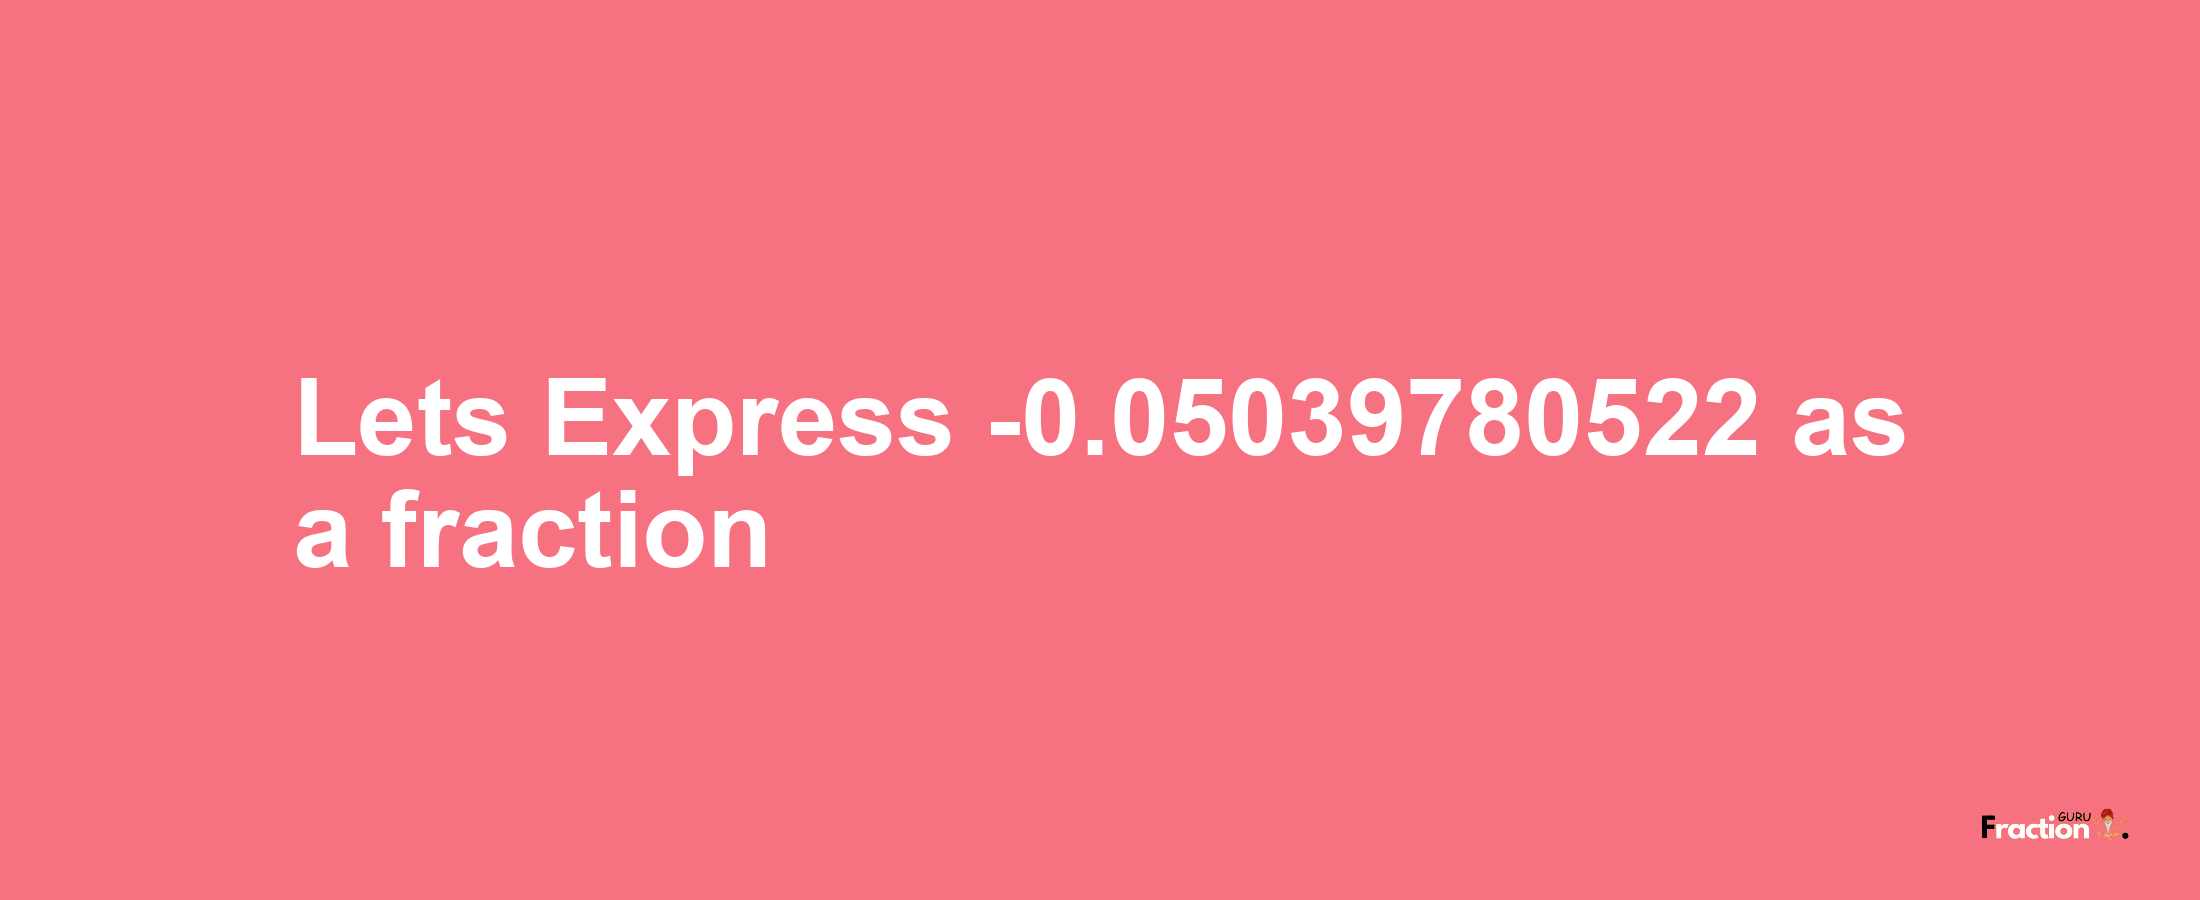 Lets Express -0.05039780522 as afraction